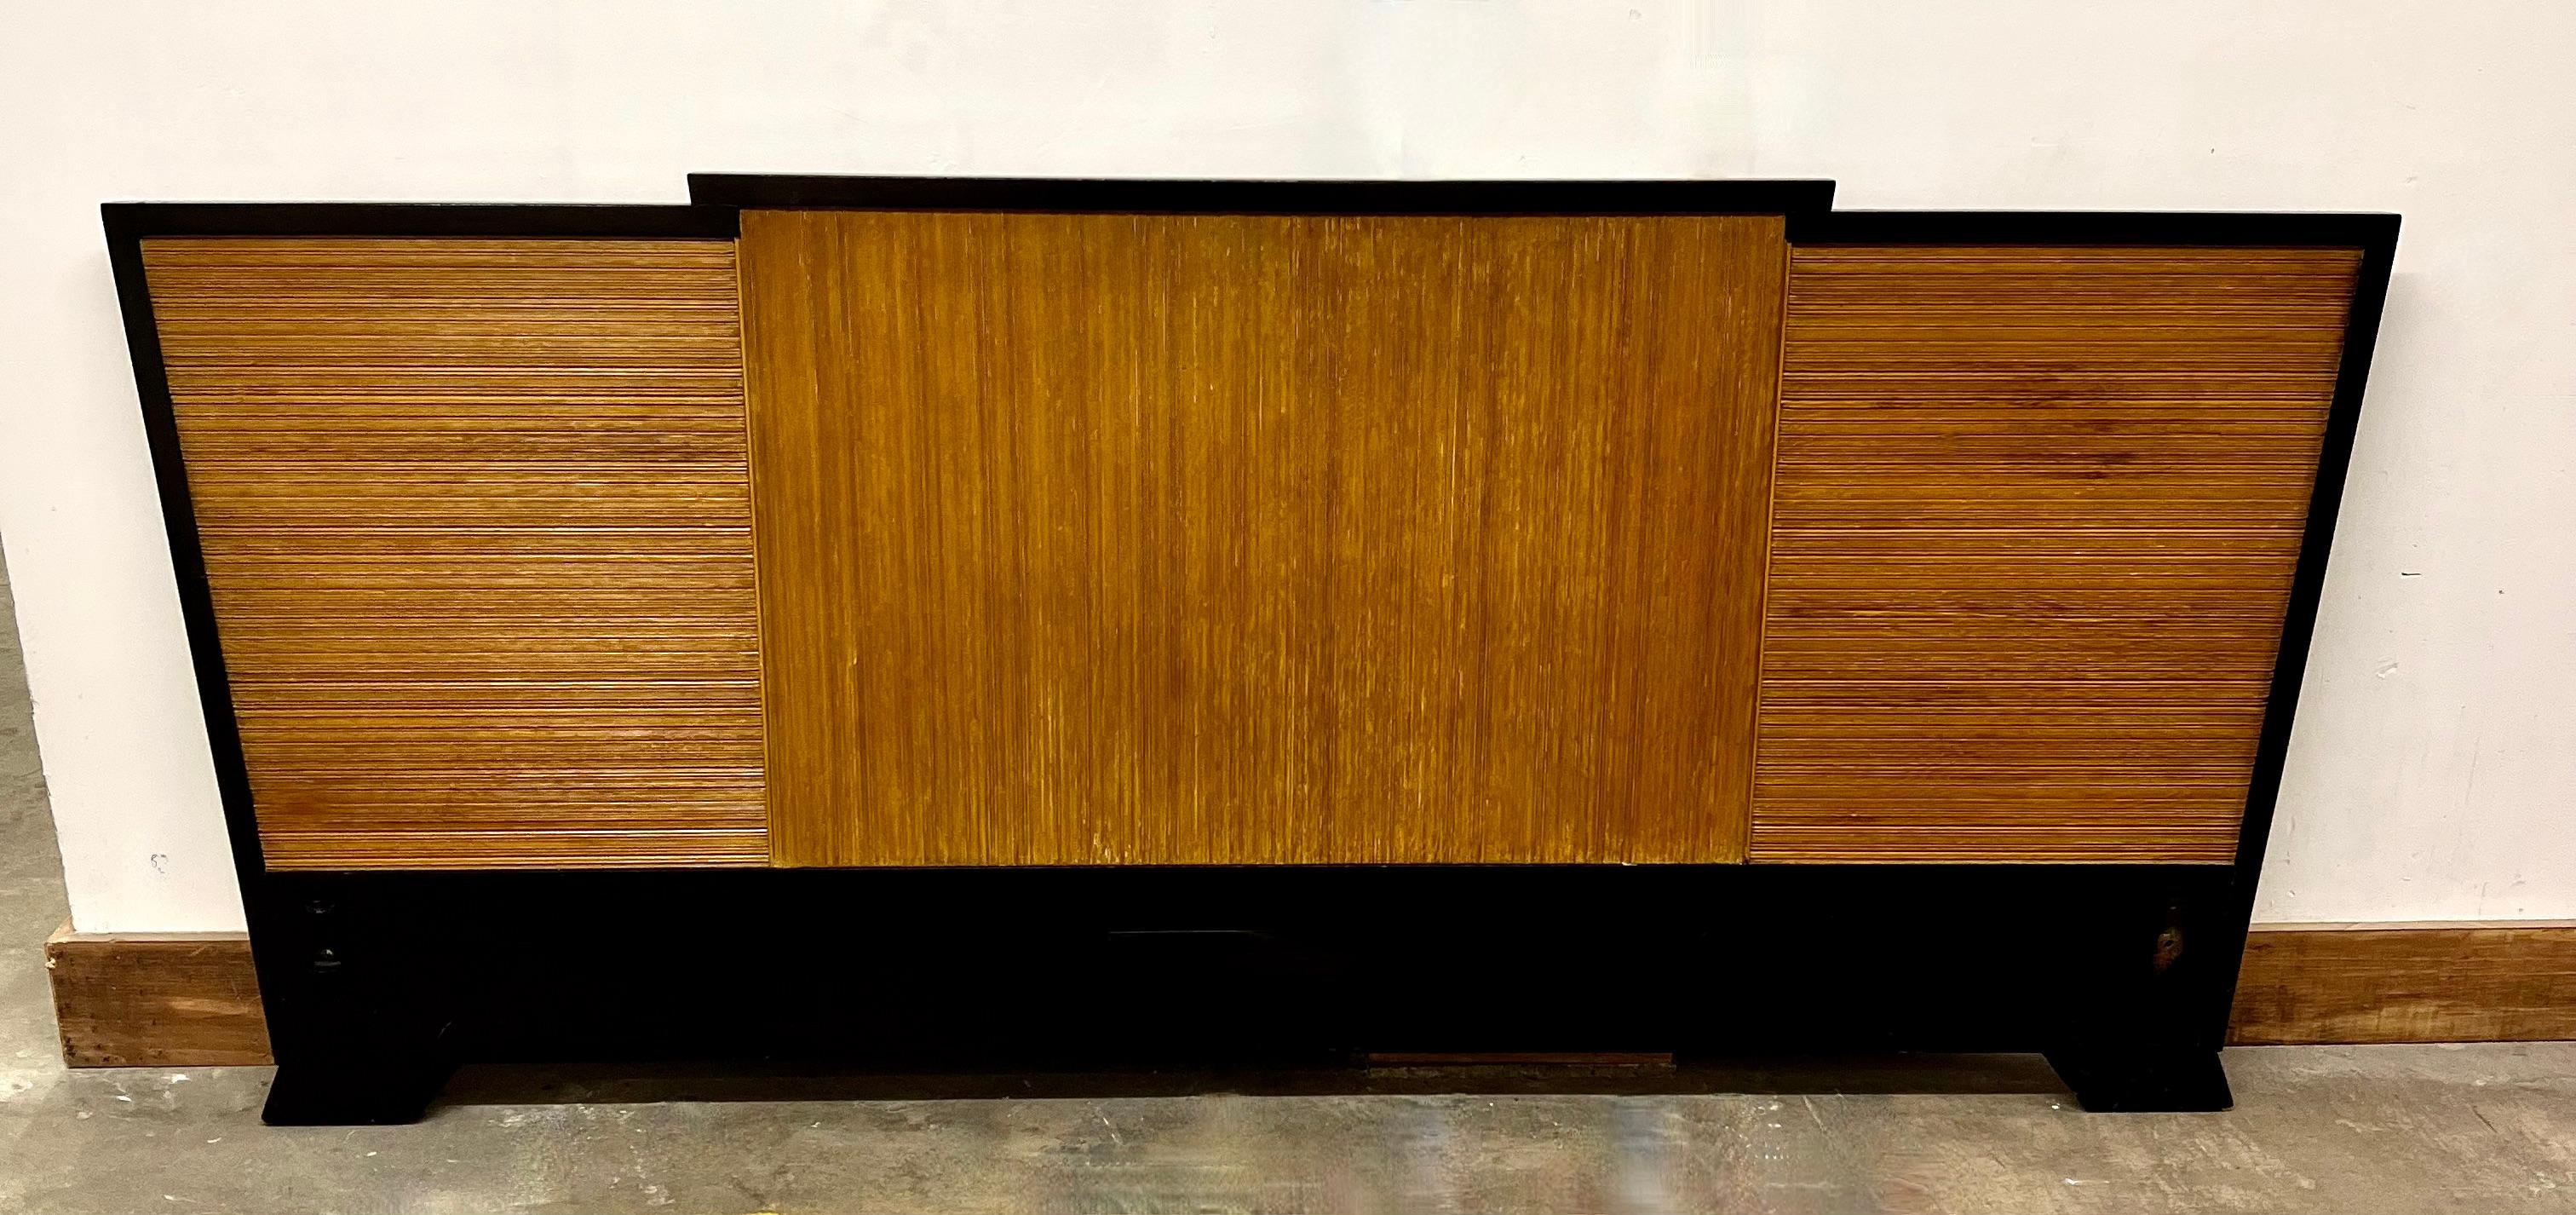 A unique and rare Paul Frankl Head board. The Frame is black lacquer with three panels of cerused or deeply ridged Oak, laid out in opposing directions. 

Truly a midcentury piece designed from the 1960s. The headboard does not come with a frame.